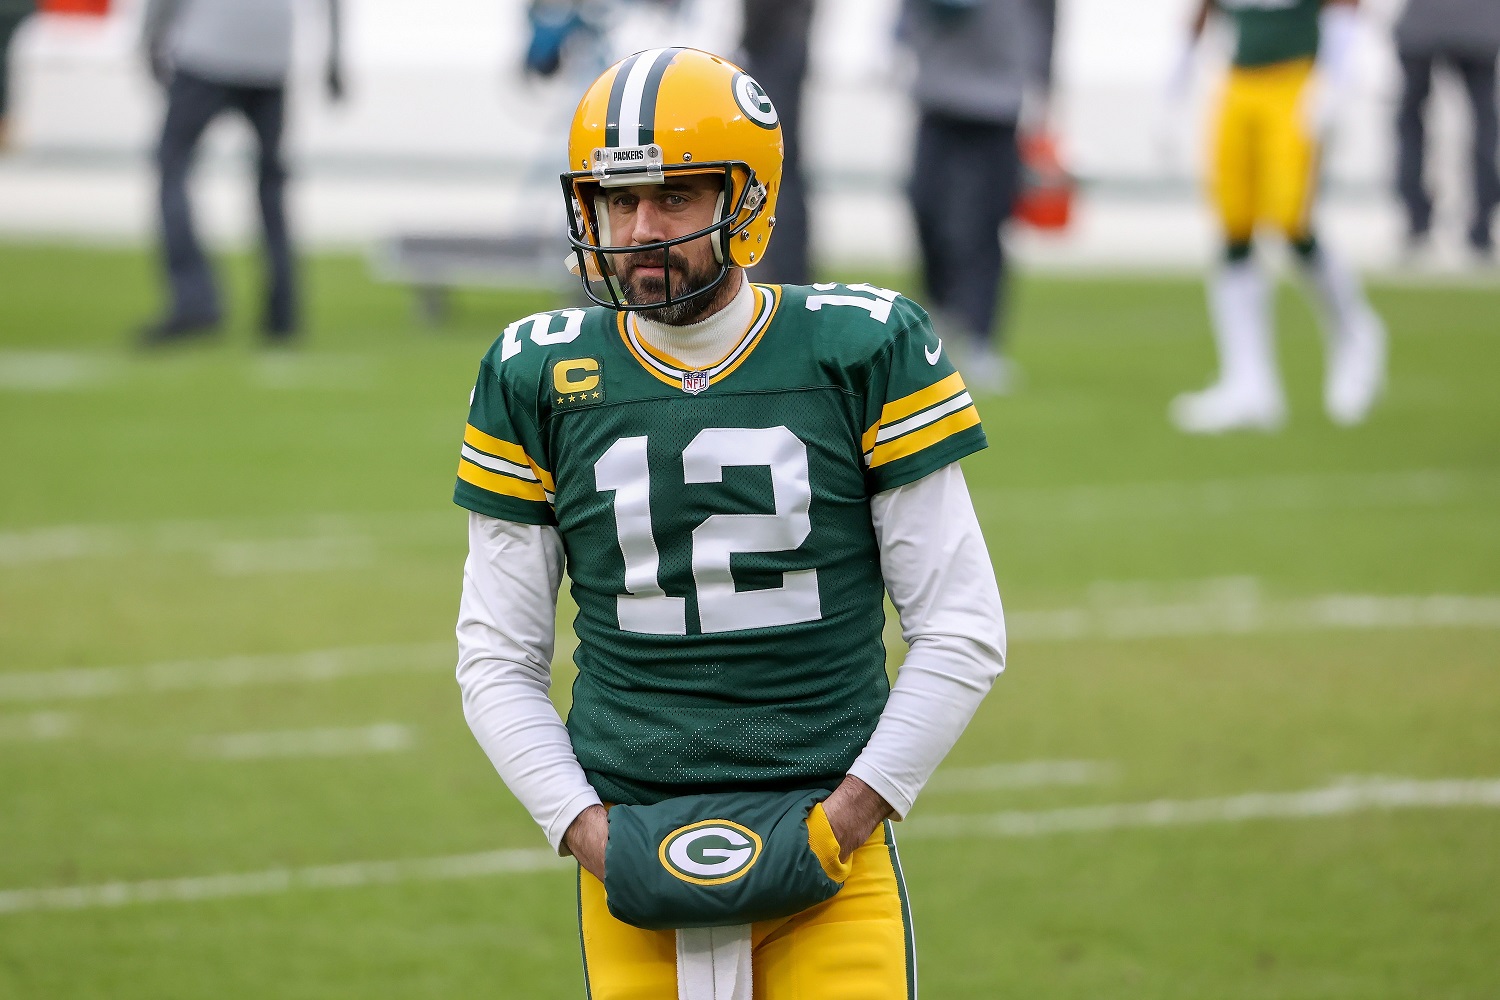 The tense standoff between Aaron Rodgers and the Green Bay Packers is a development seldom seen in the NFL before this offseason. However, the Houston Texans and Seattle Seahawks are also experiencing issues with their quarterbacks. | Dylan Buell/Getty Images